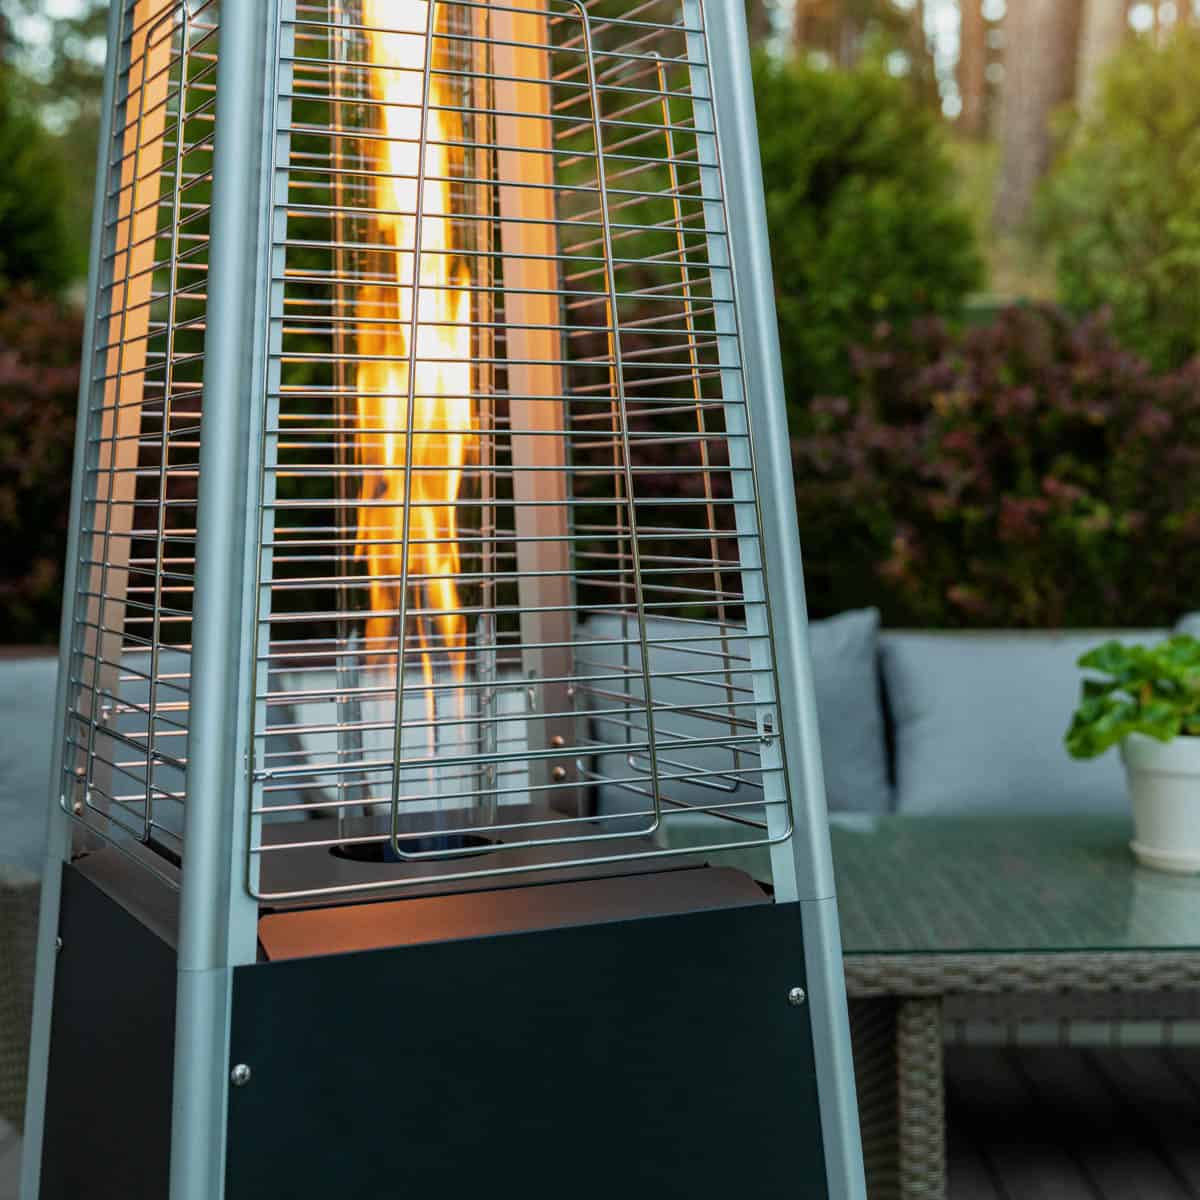 Best Natural Gas Patio Heater For All Year Comfort